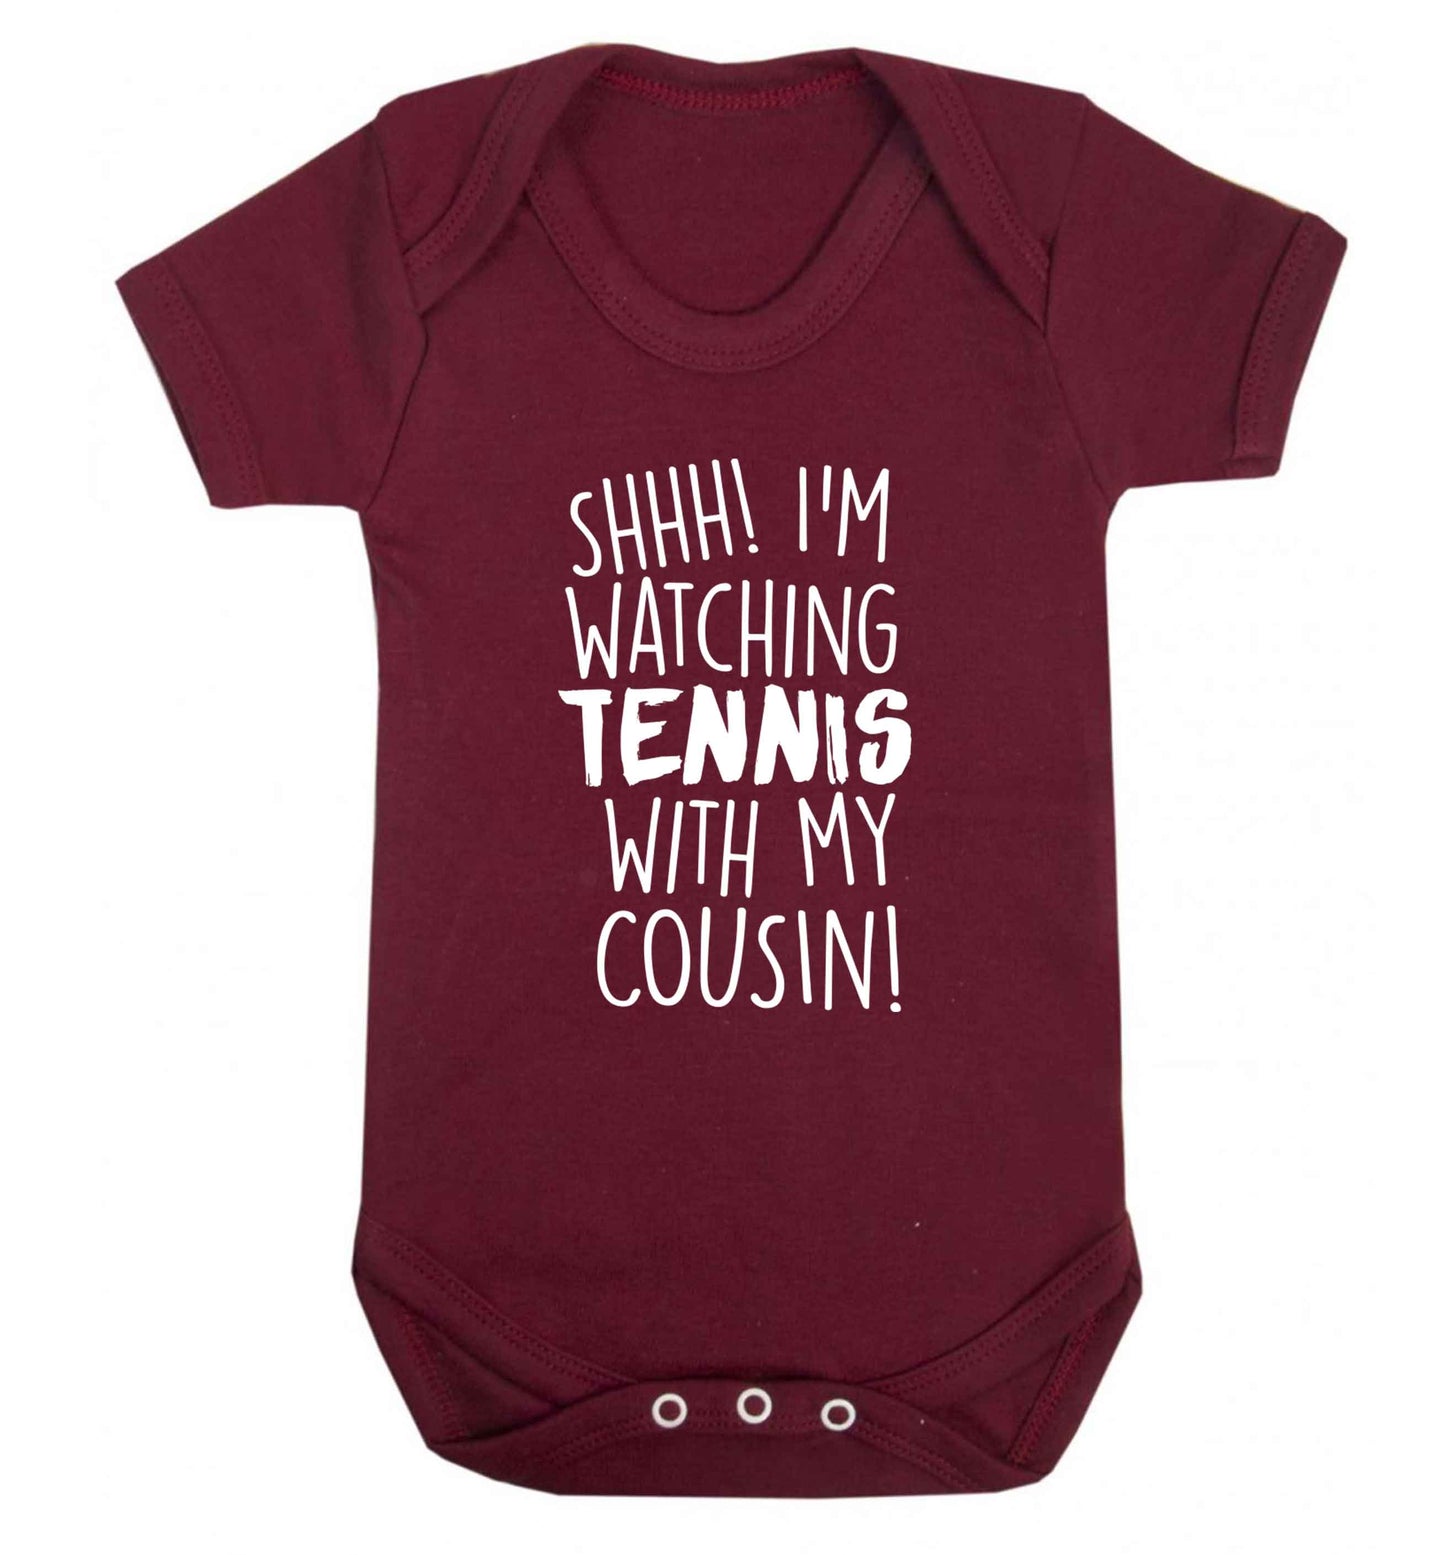 Shh! I'm watching tennis with my cousin! Baby Vest maroon 18-24 months